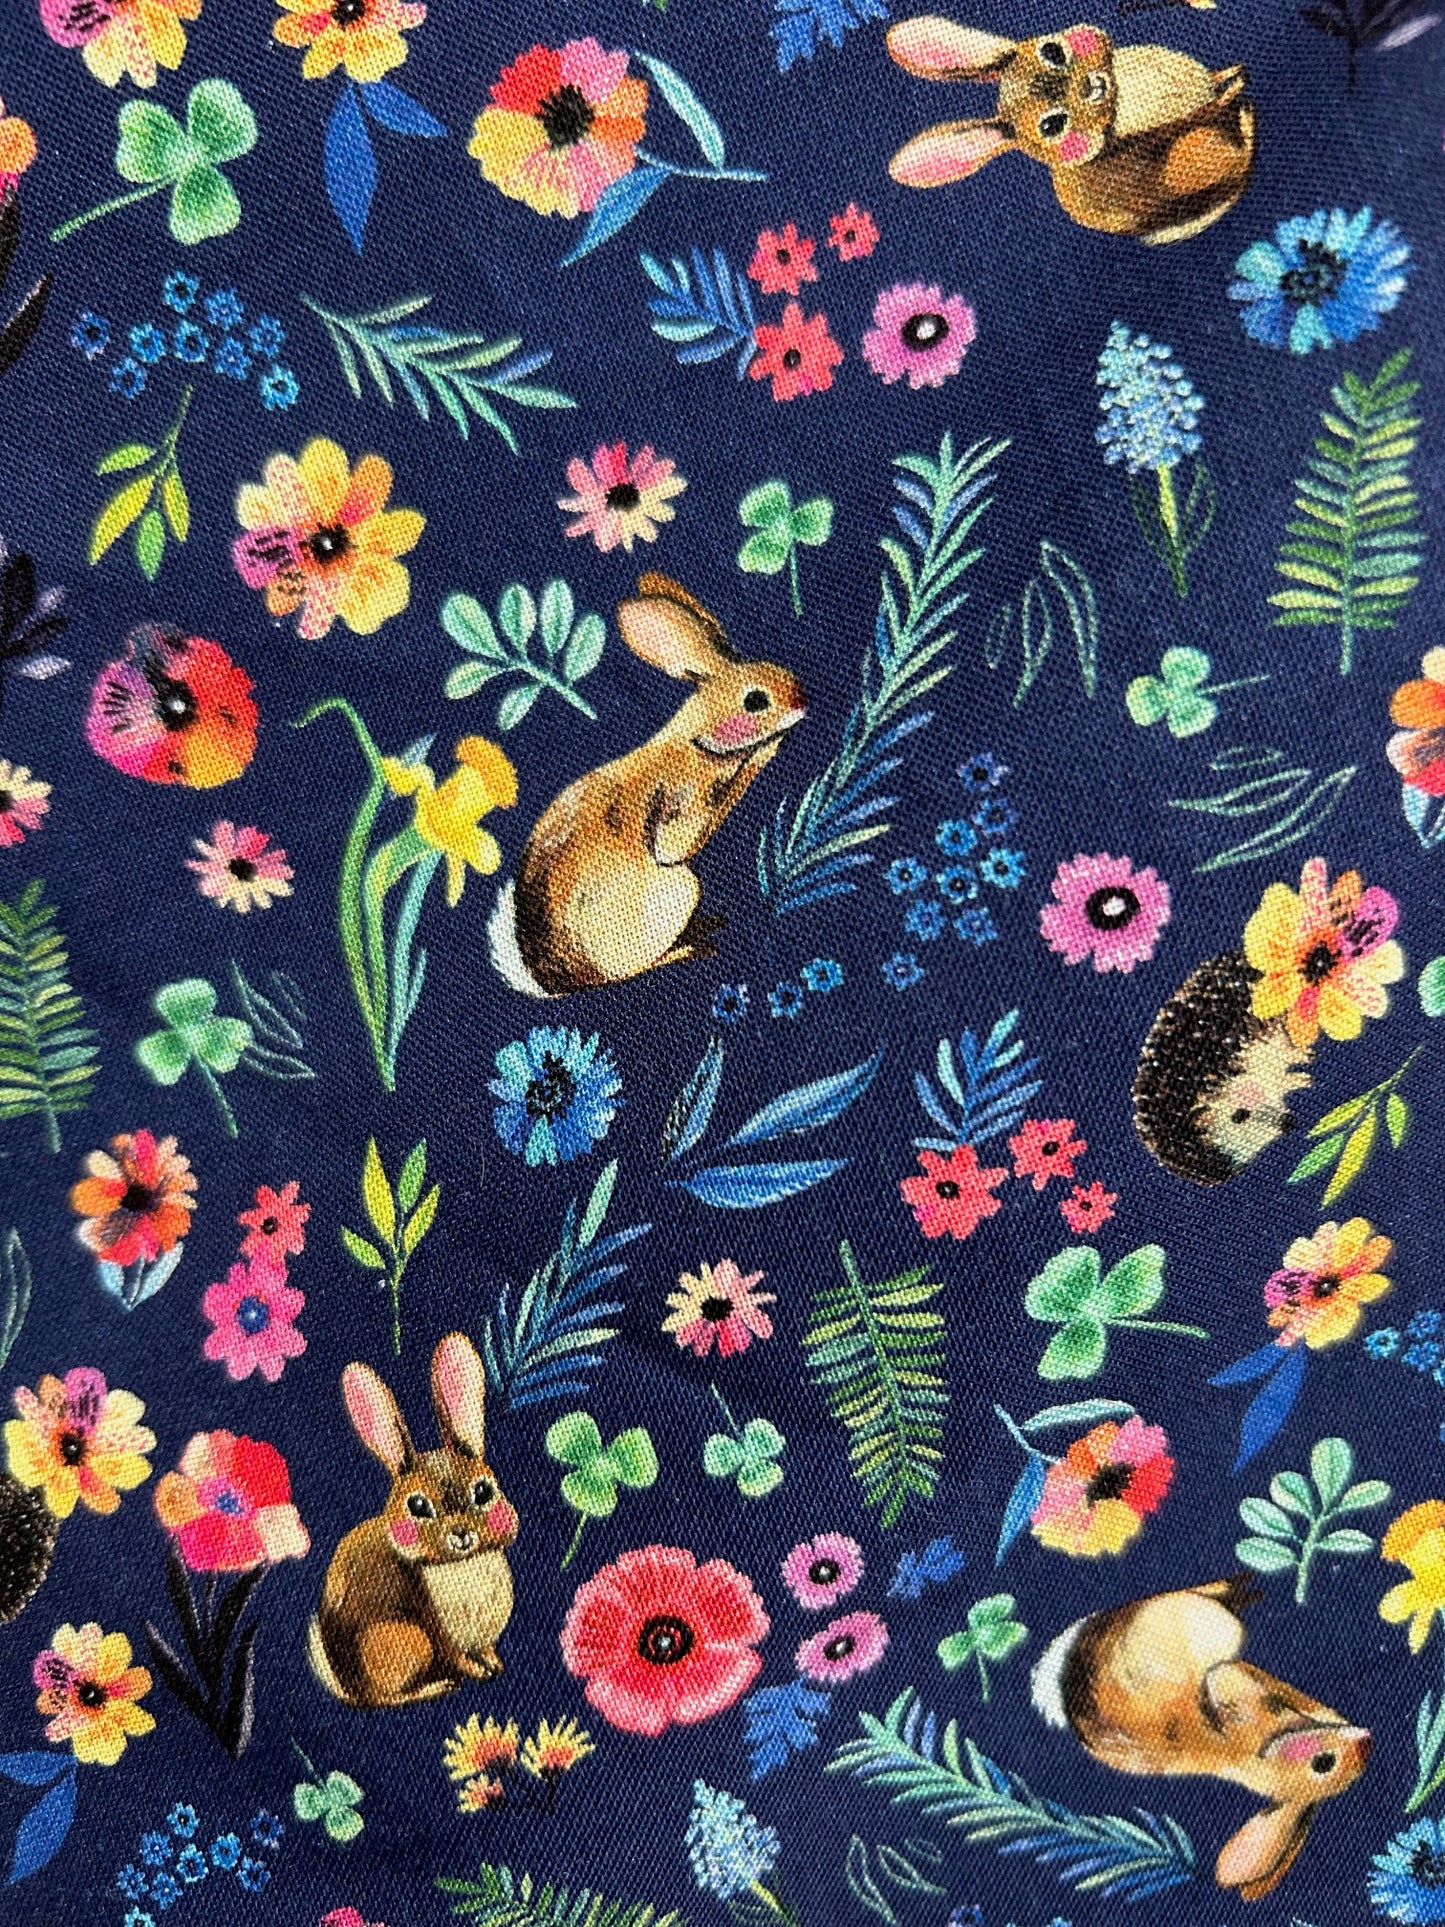 close up of fabric showing bunnies, hedgehogs and flowers on navy background